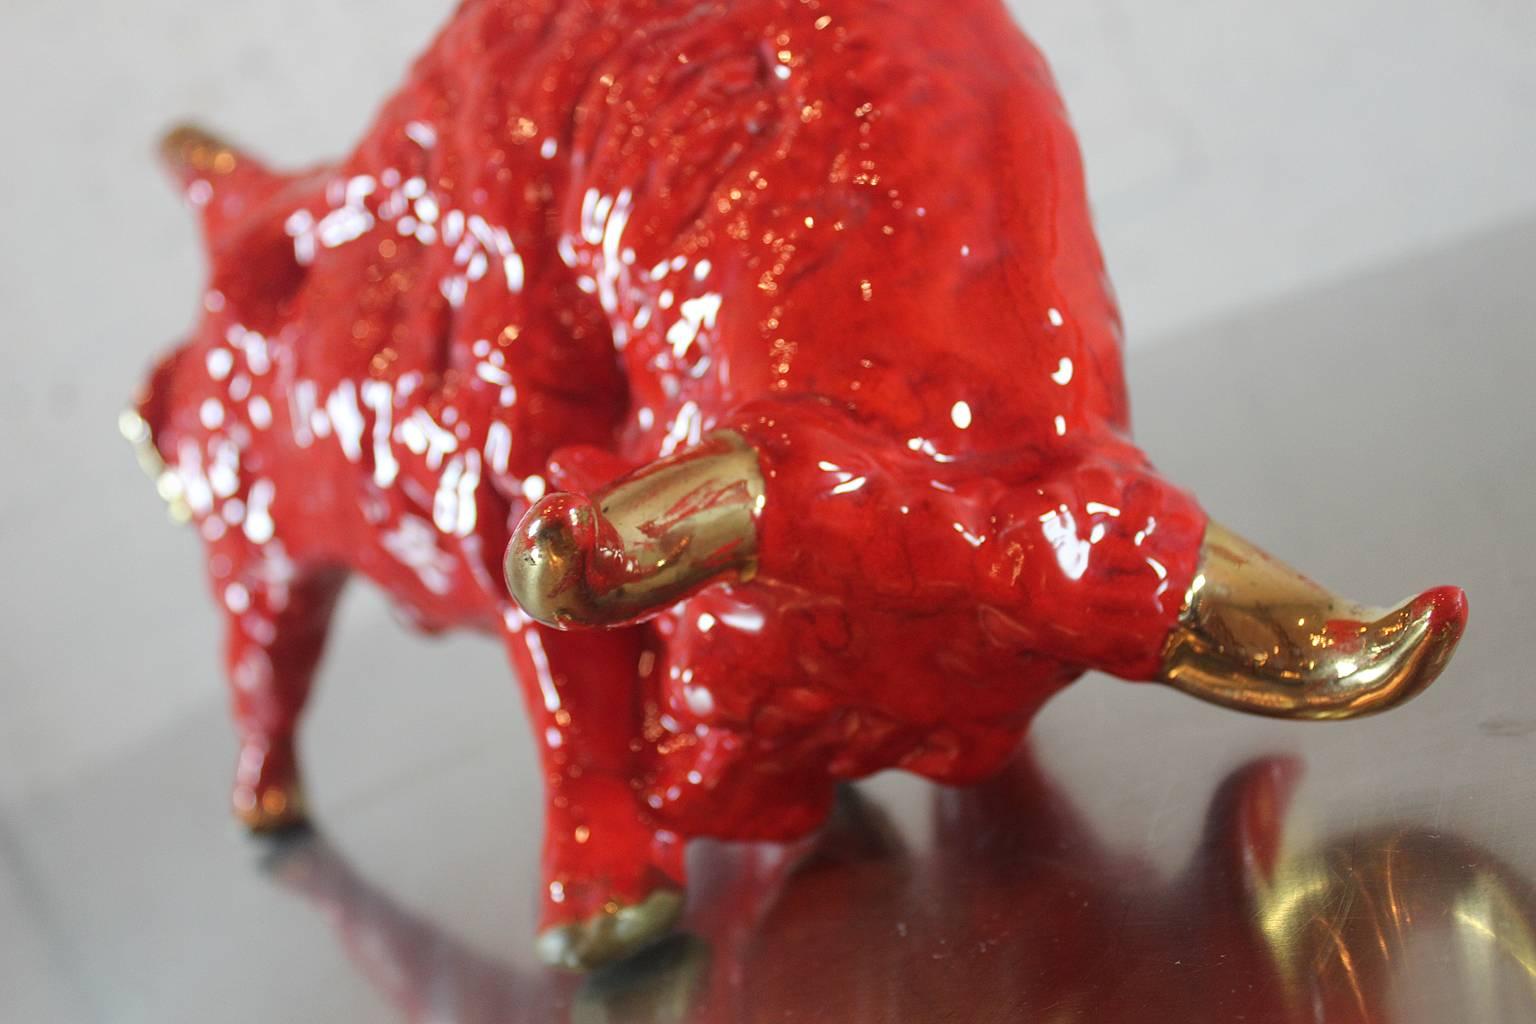 Here they are!! Vintage Royal Haeger style red ceramic bulls. What fantastic Bovine!!! These bulls are not signed but they are a wonderful example of 1950s figural pottery and very Royal Haeger-like. Bright red orange with gold tail, horns and